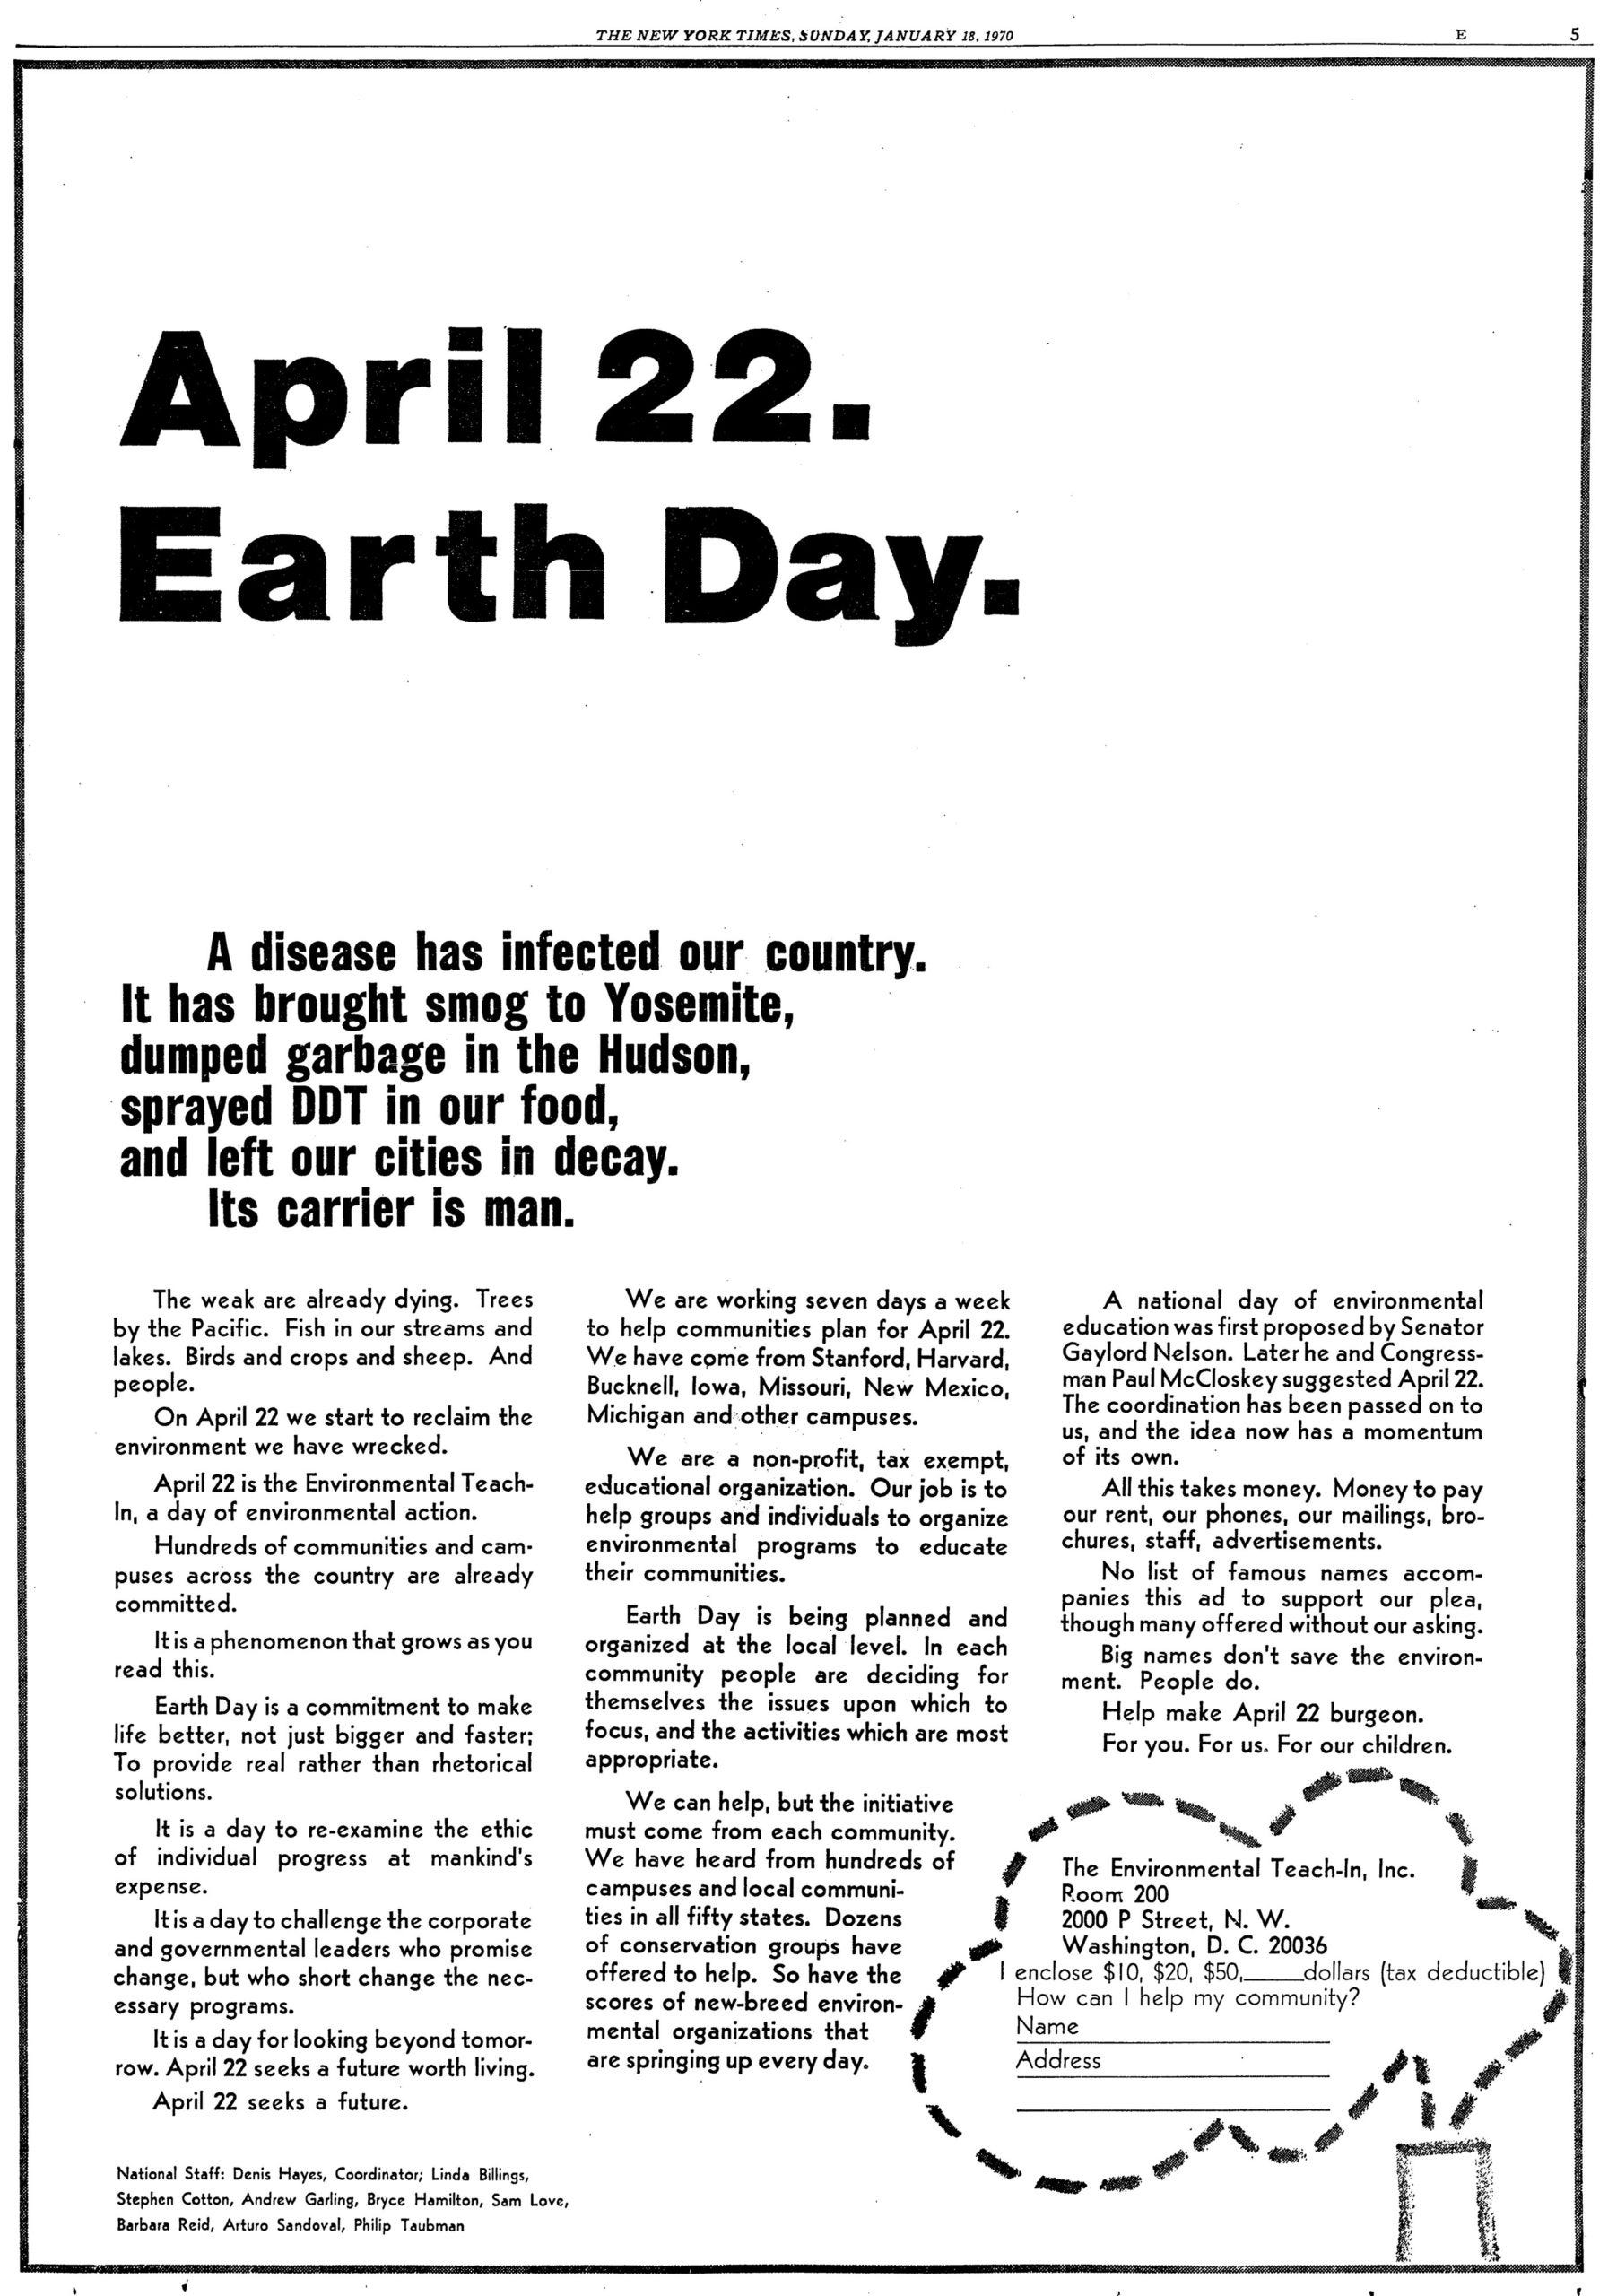 The Genius of Earth Day: How a 1970 Teach-In Unexpectedly Made the